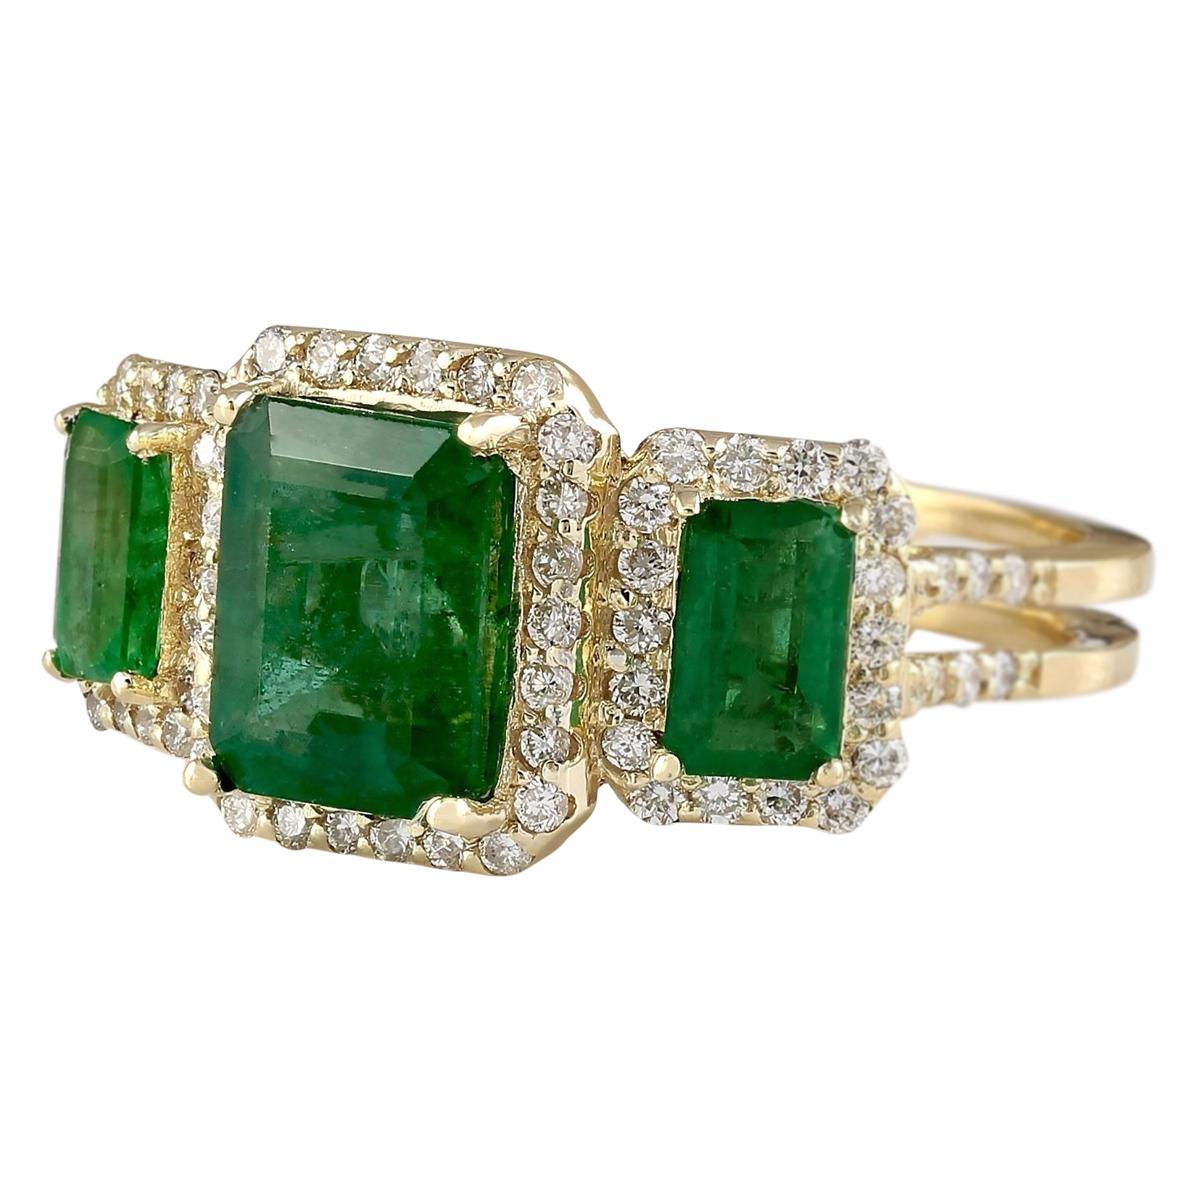 Stamped: 14K Yellow Gold
Total Ring Weight: 5.8 Grams
Total Natural Emerald Weight is 3.76 Carat (Measures: 9.00x7.00 mm)
Color: Green
Total Natural Diamond Weight is 0.80 Carat
Color: F-G, Clarity: VS2-SI1
Face Measures: 11.55x20.05 mm
Sku: